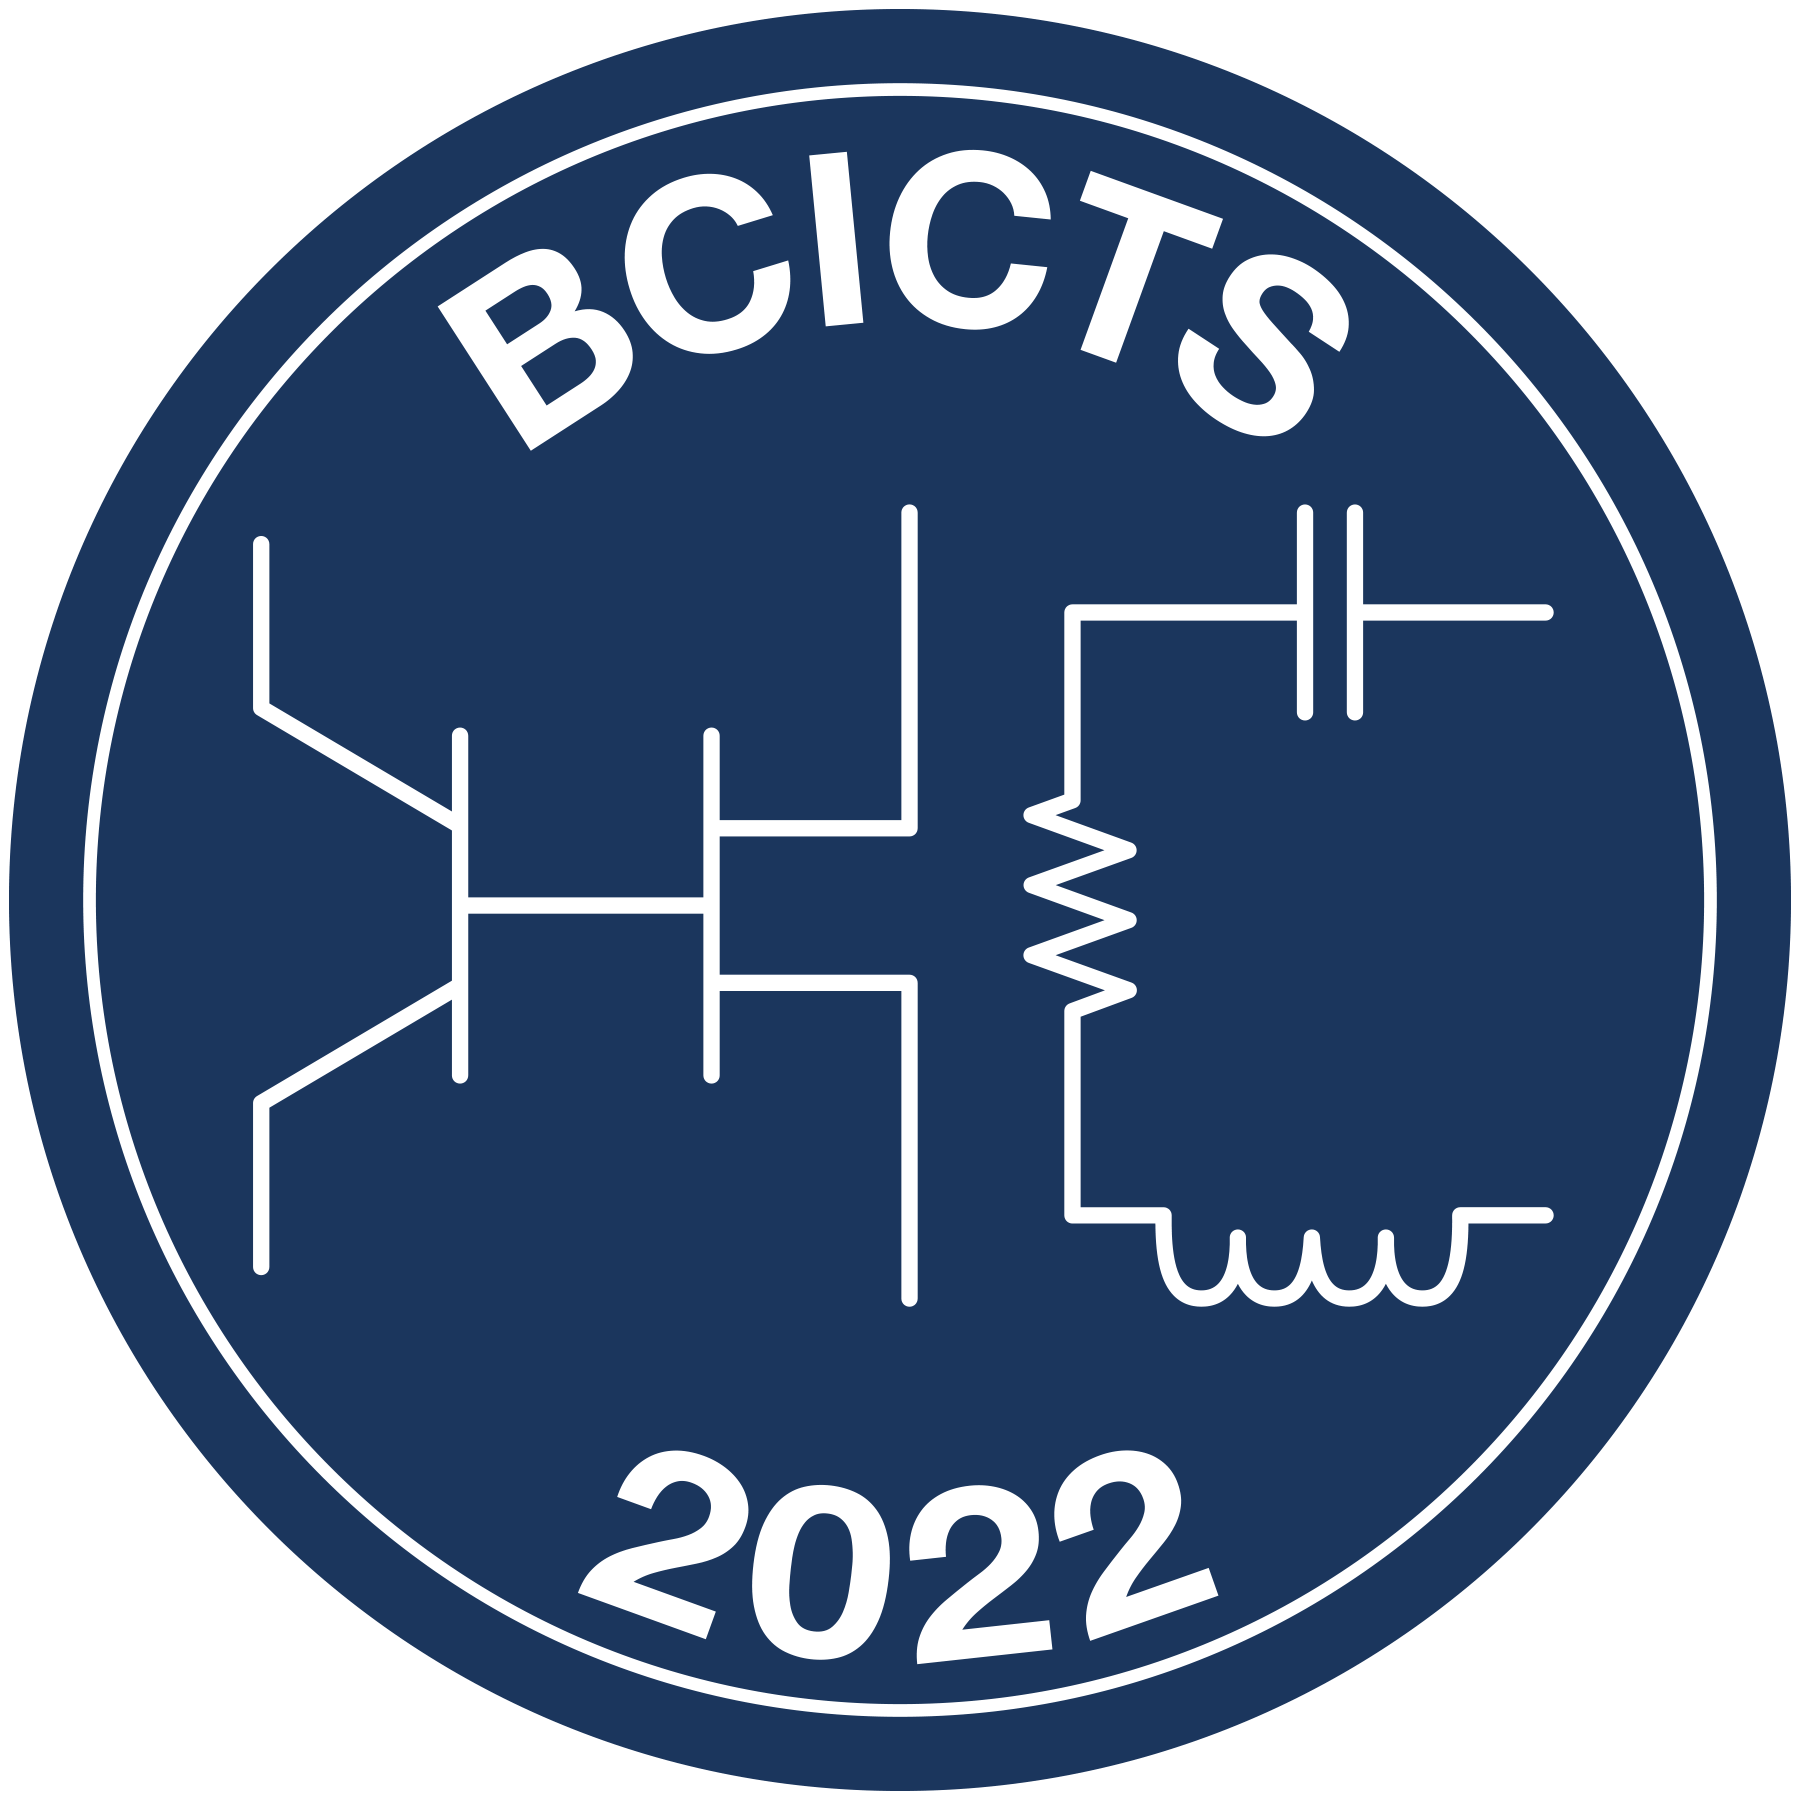 BCICTS-FINAL-LOGO-2022-WhiteOverBlue.png